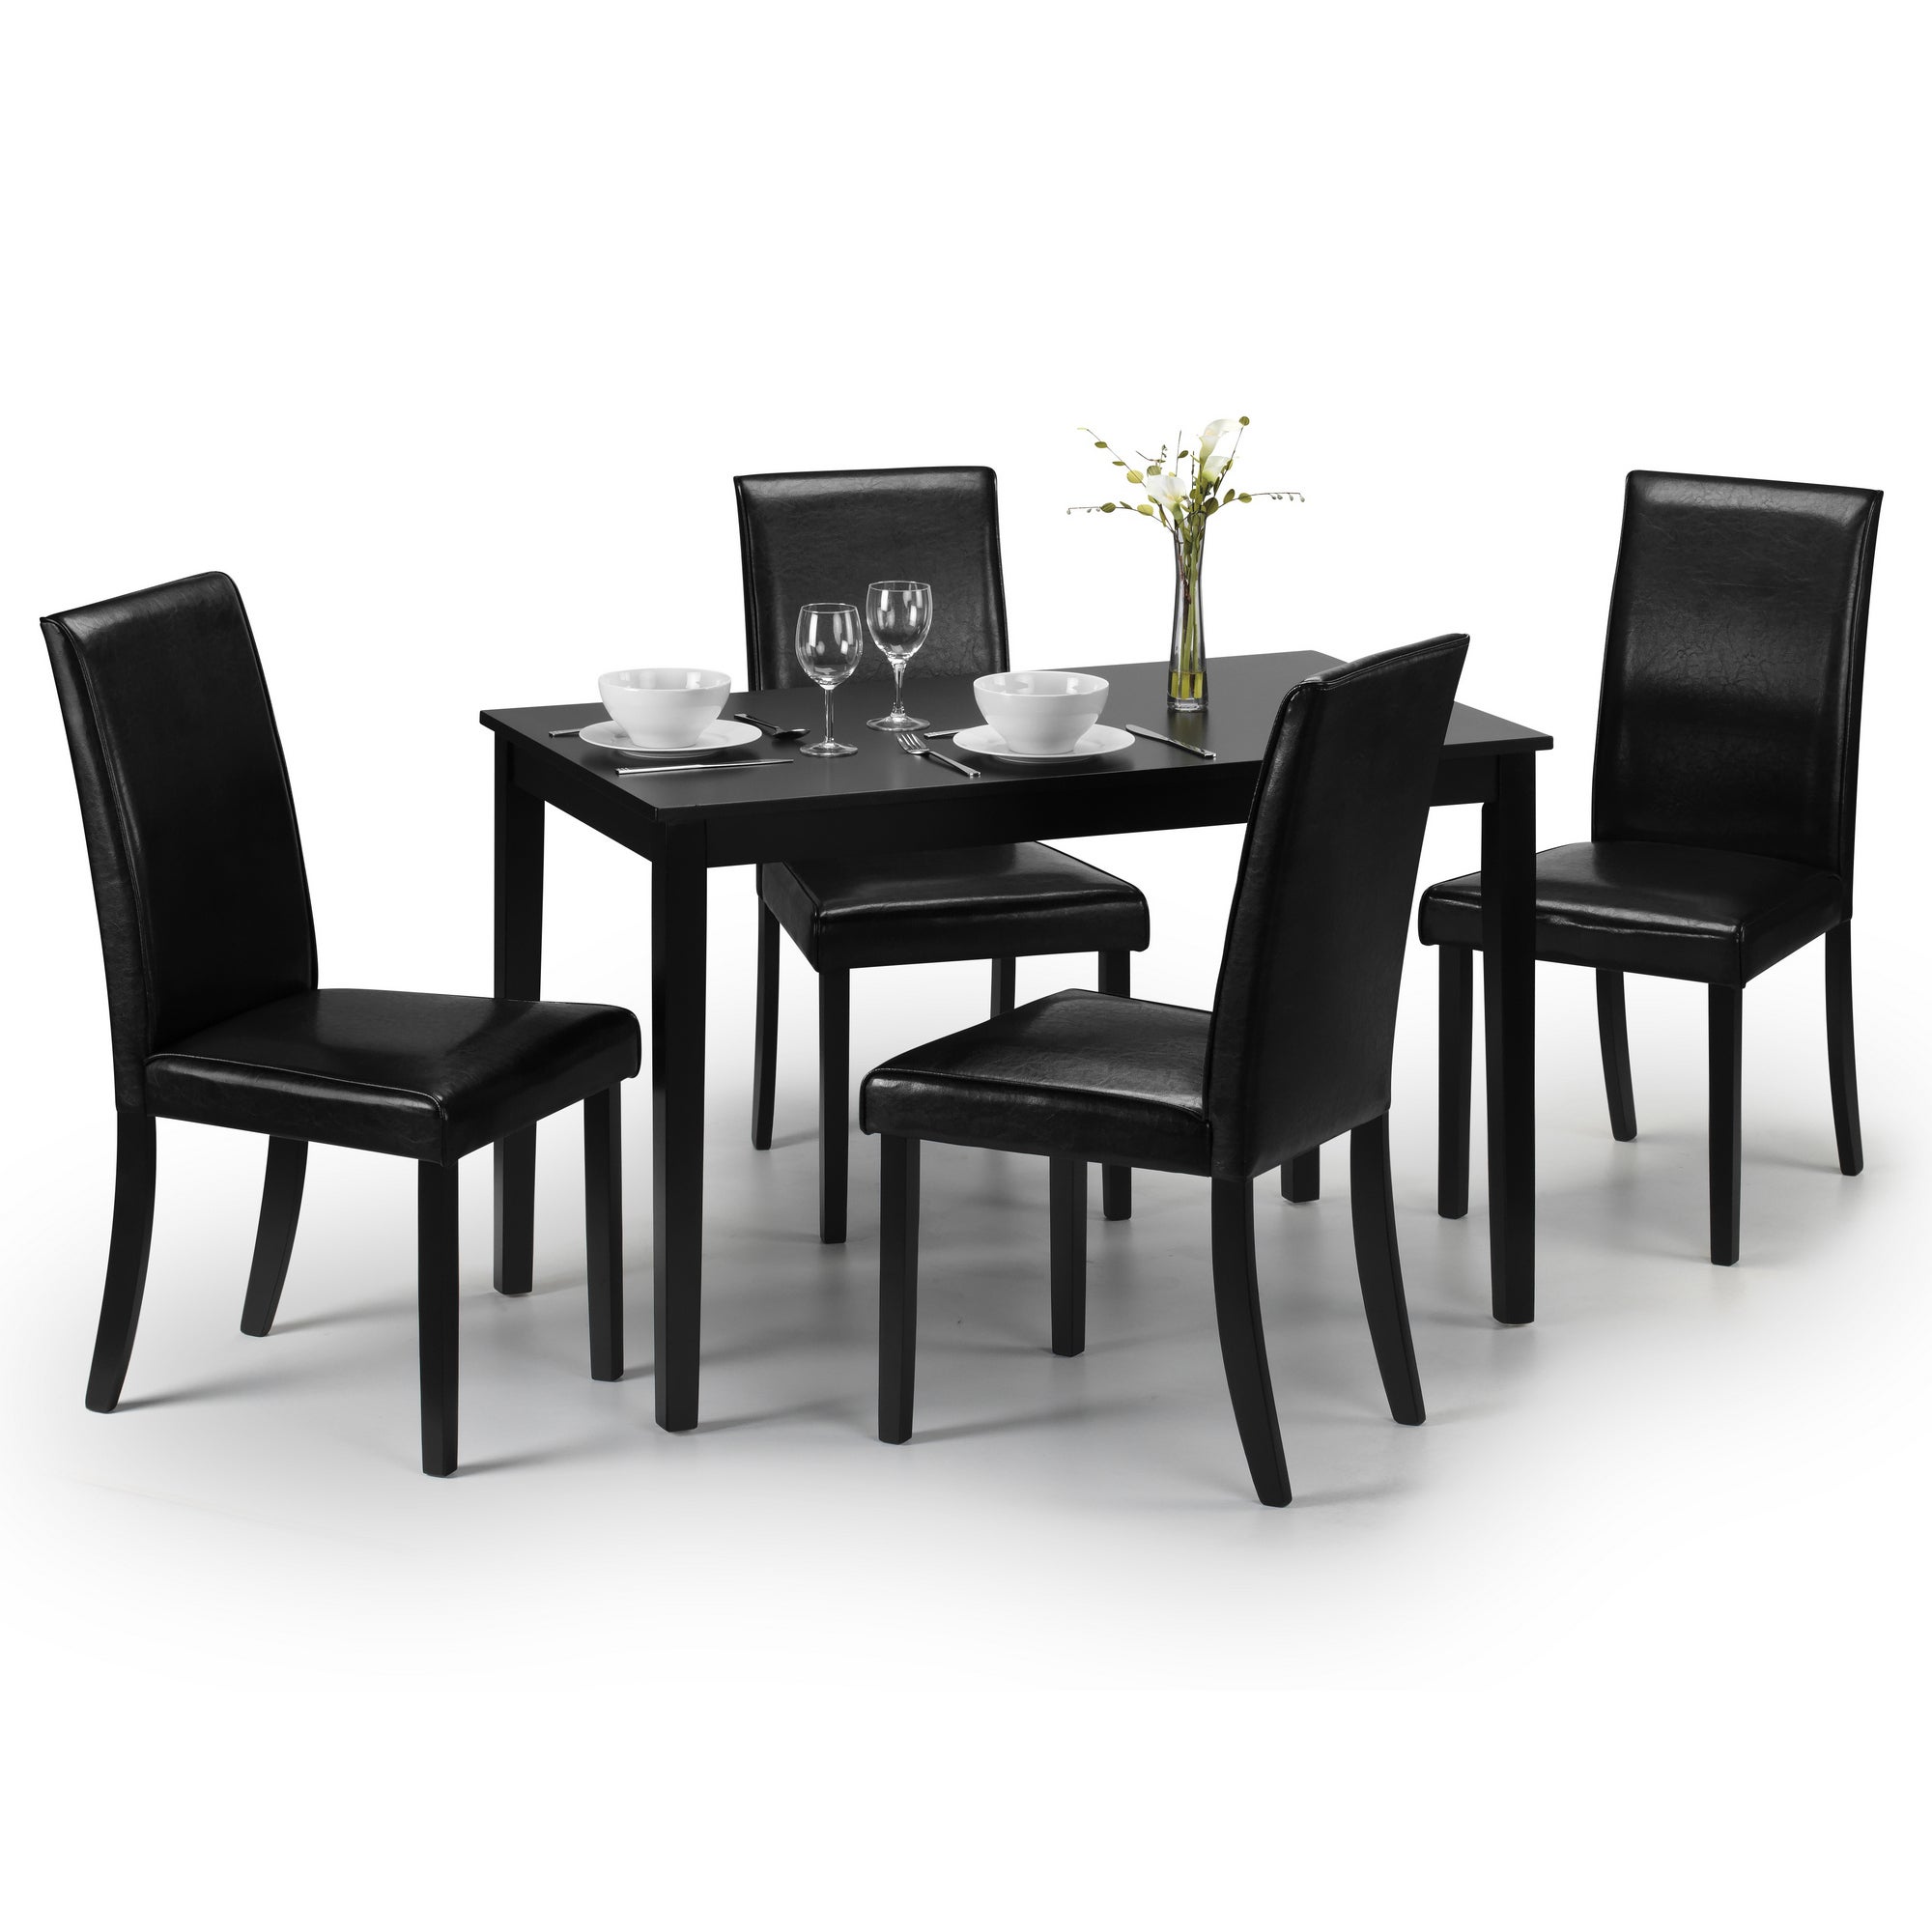 Hudson Round Dining Table with 4 Chairs, Black